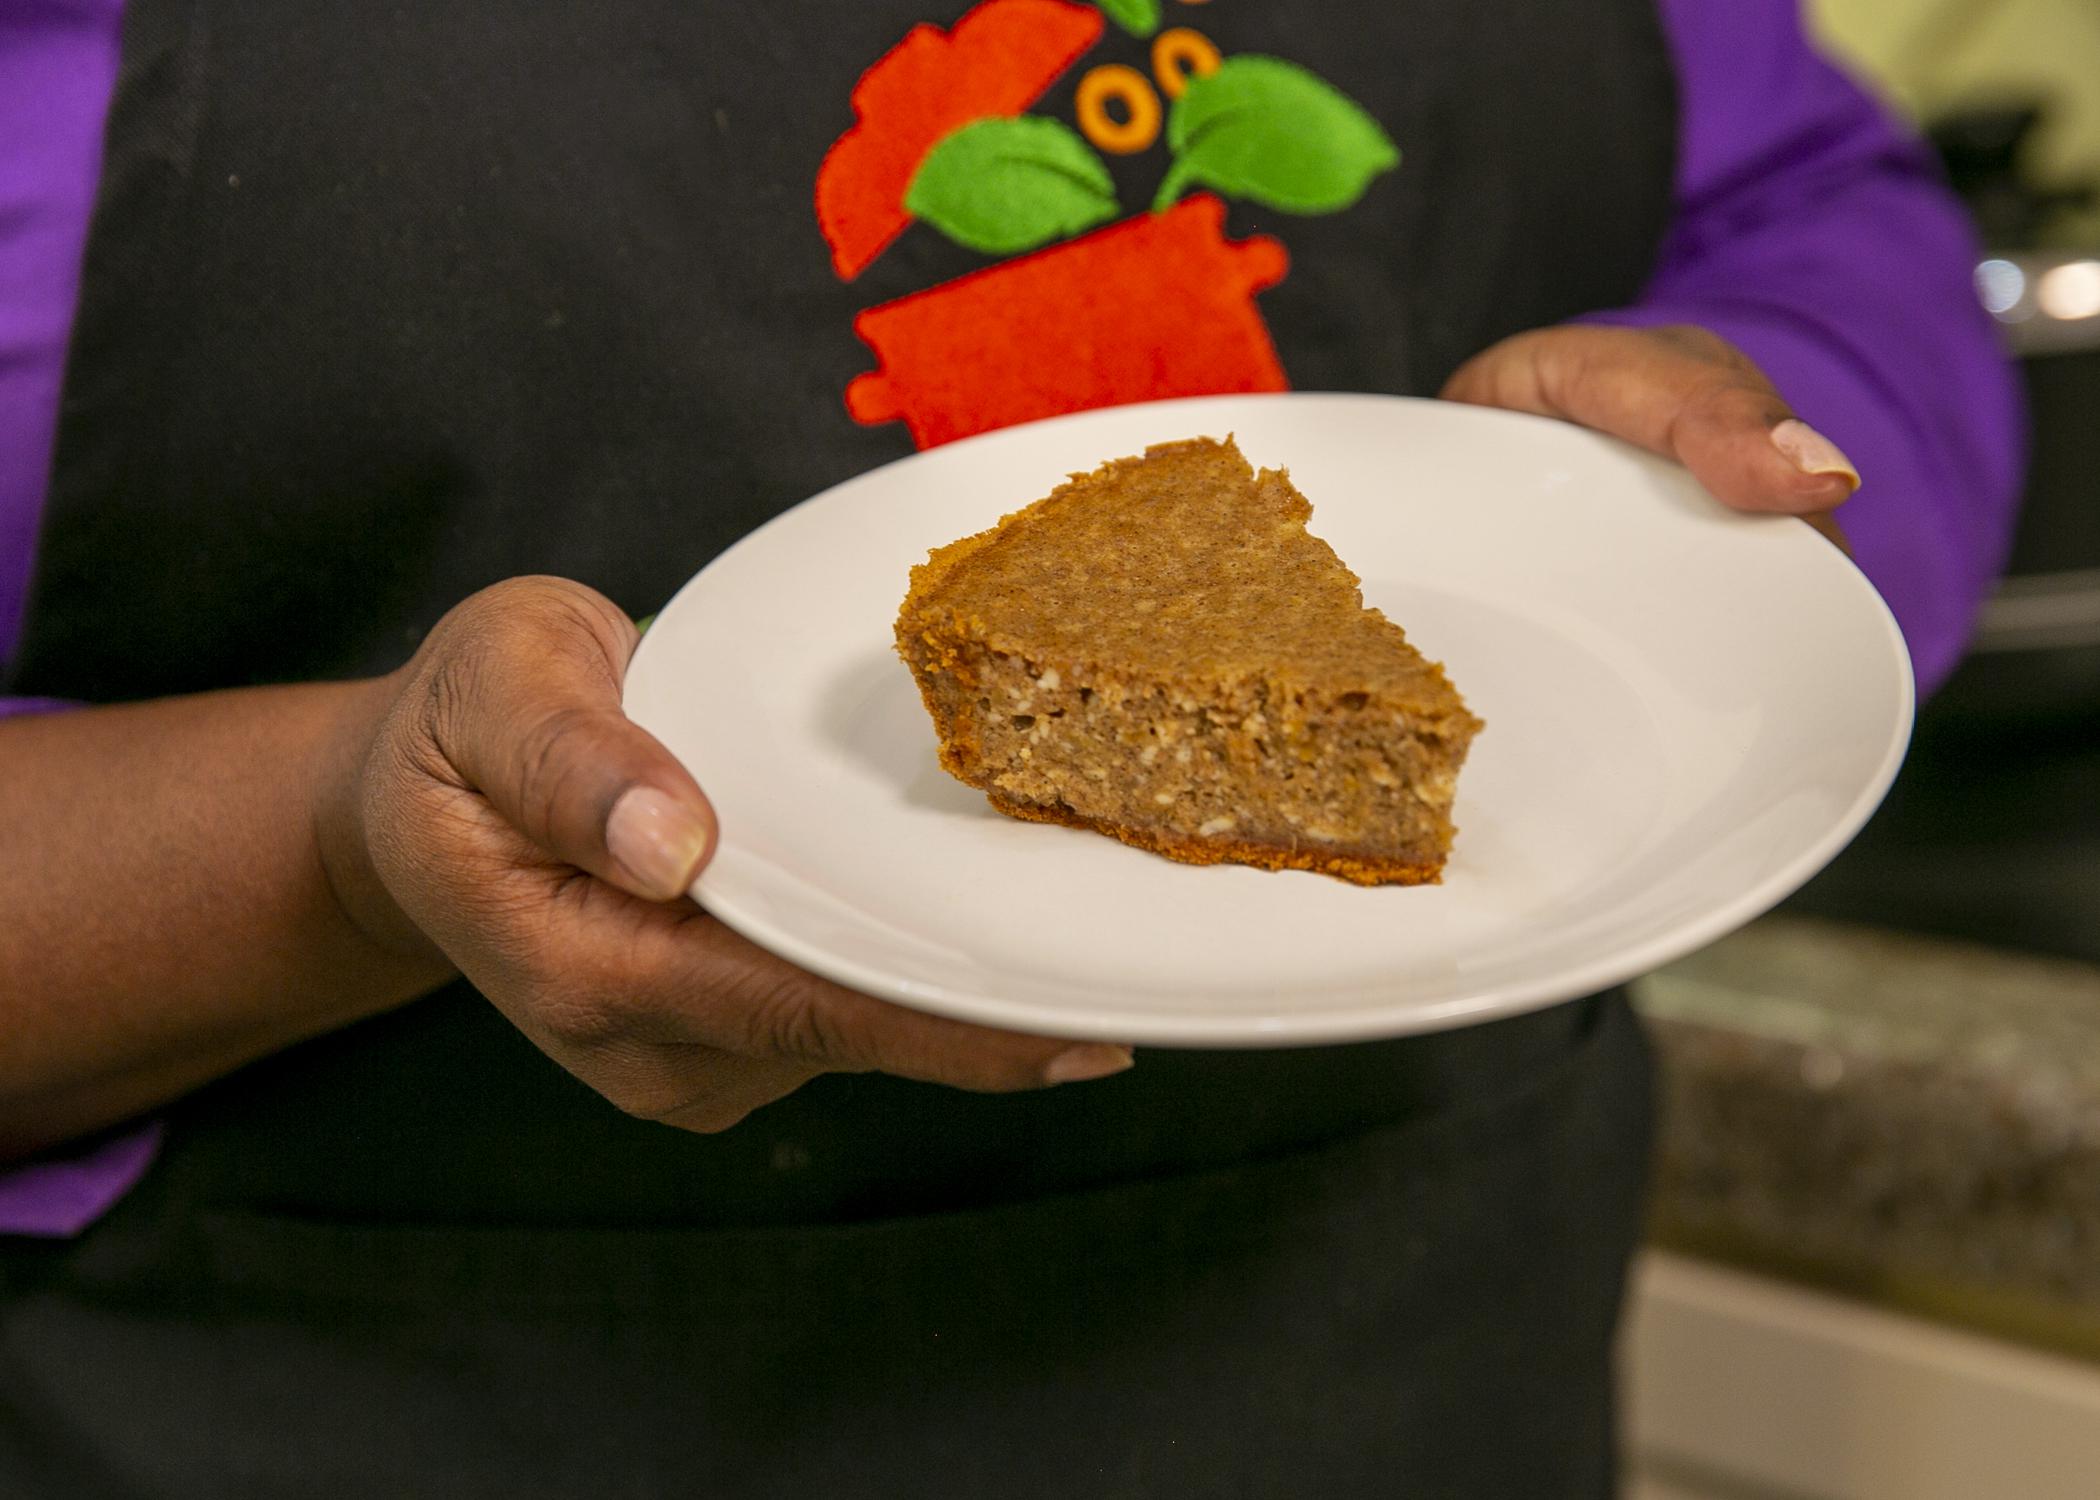 Hands hold a plate with a slice of sweet potato cheese pie